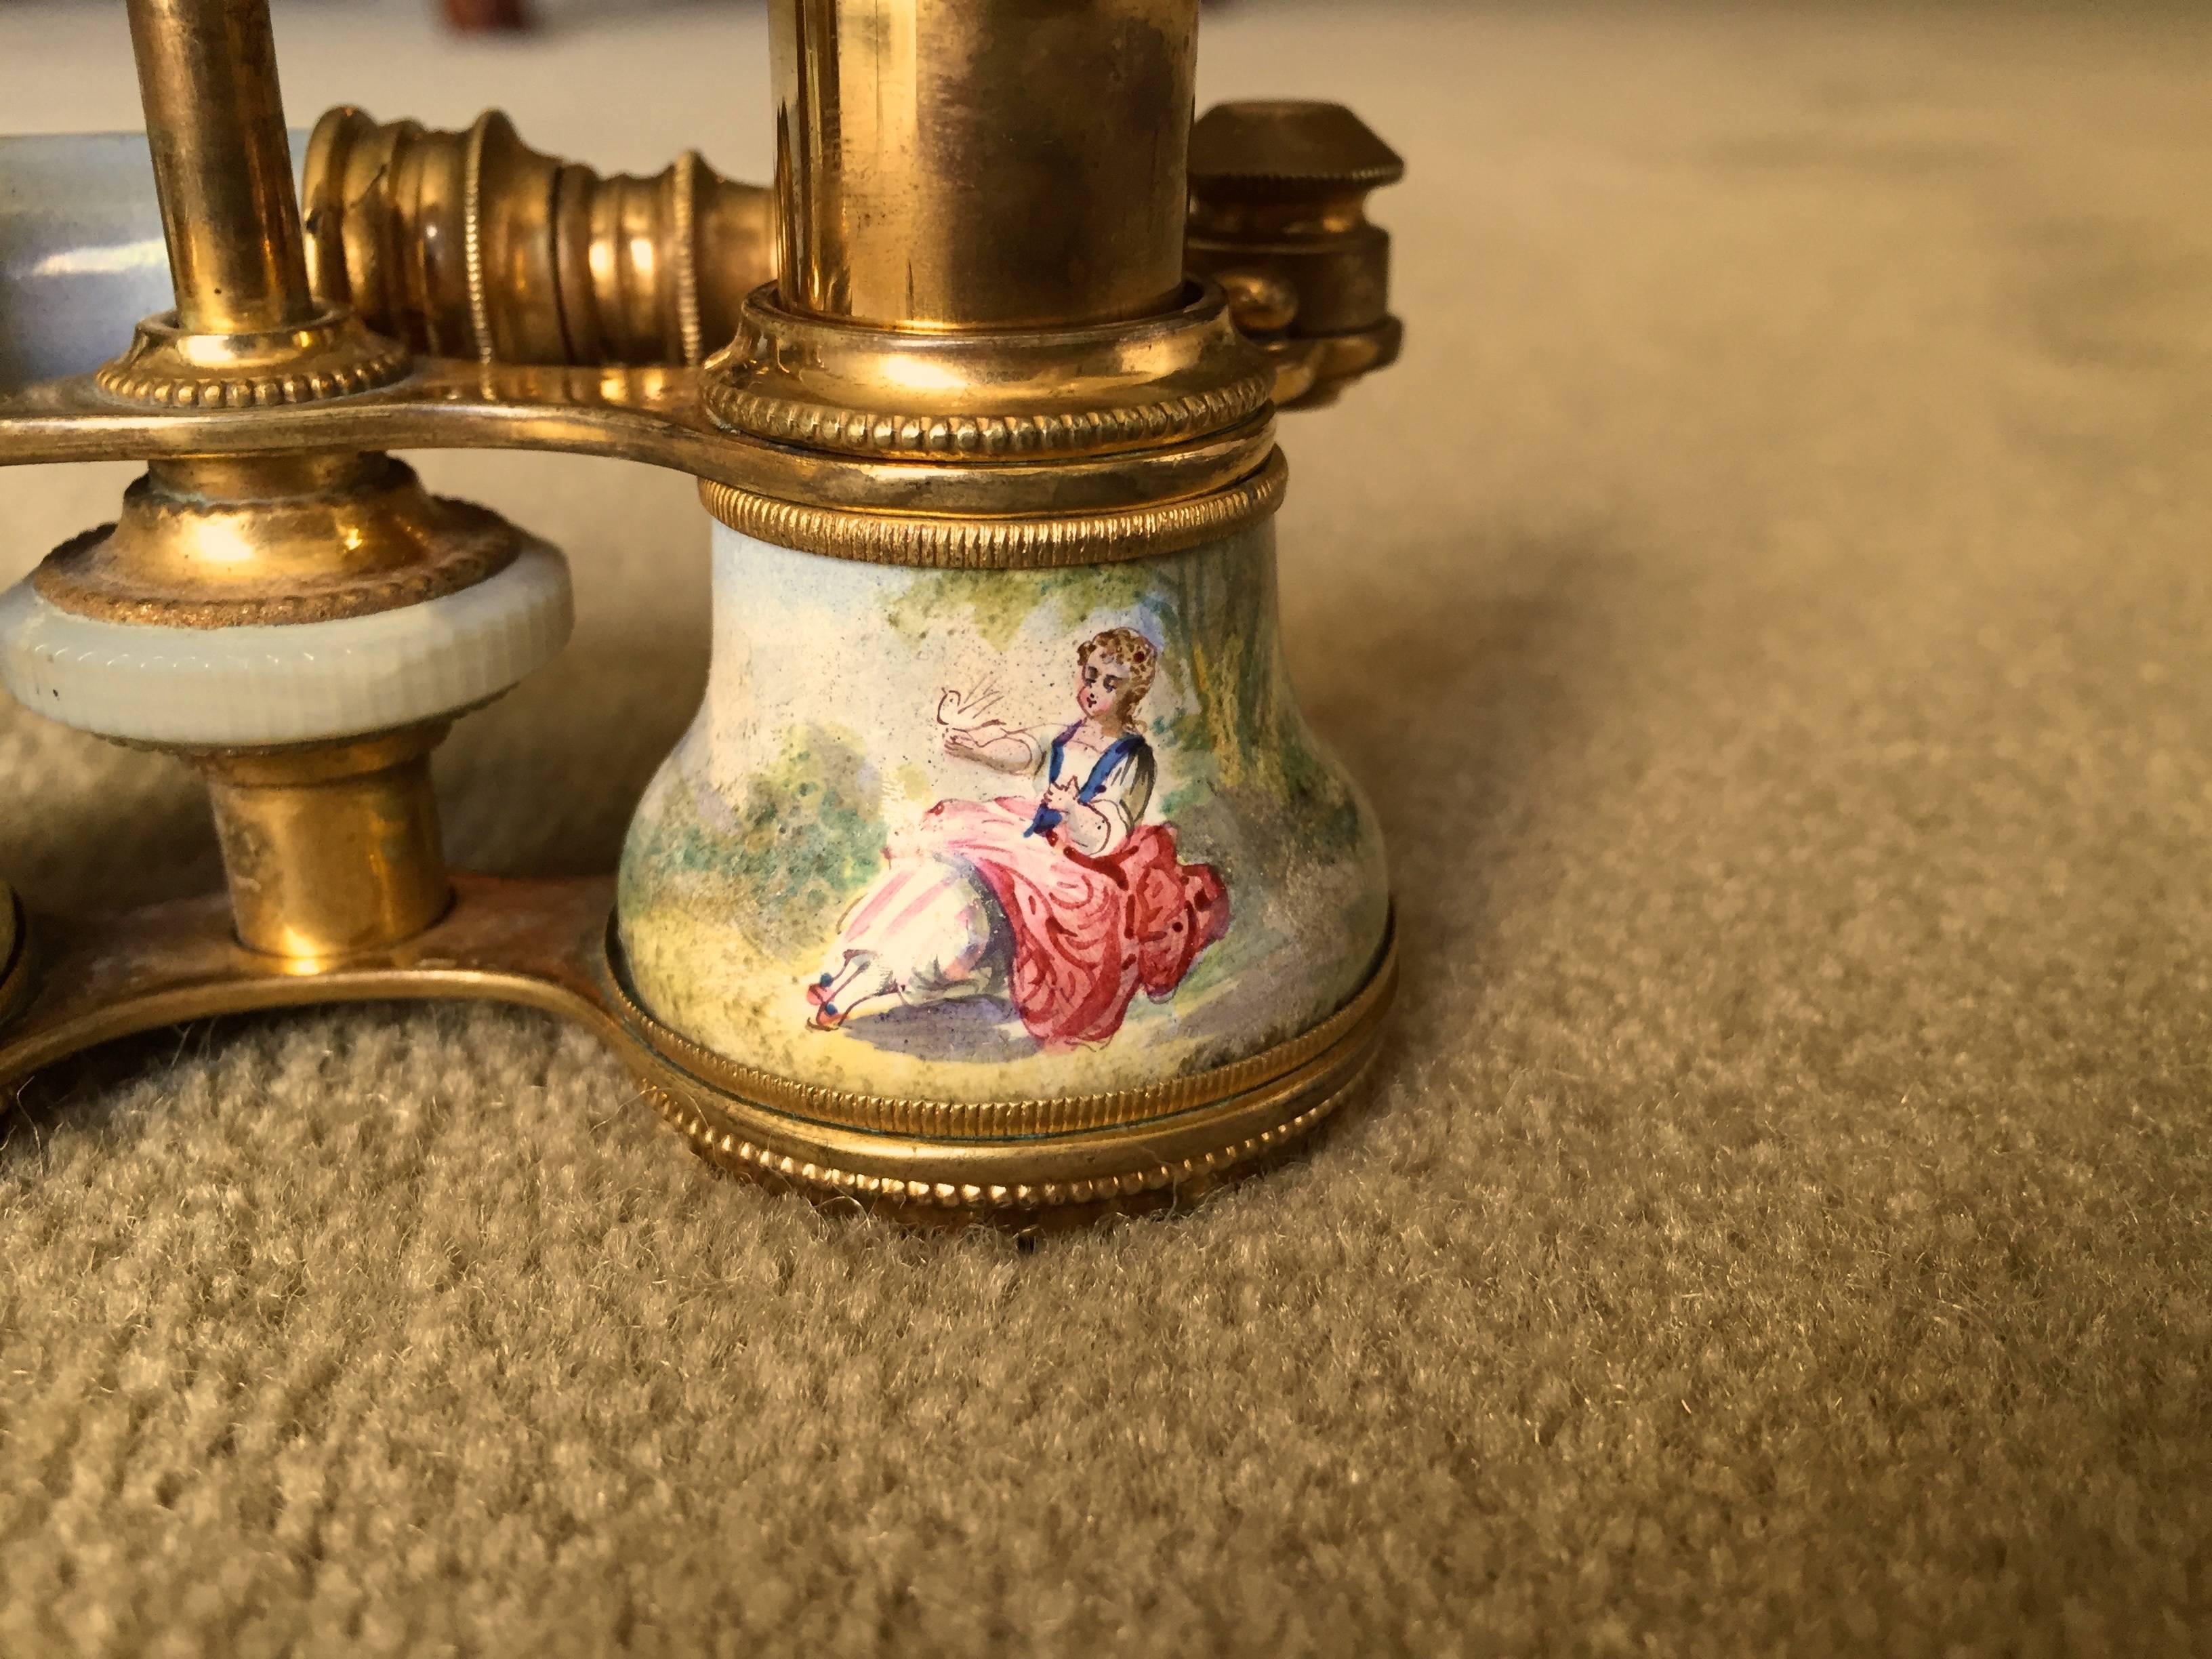 French Enamel Opera Glasses Courtship Scenes Hand-Painted, circa 1880, Paris For Sale 1